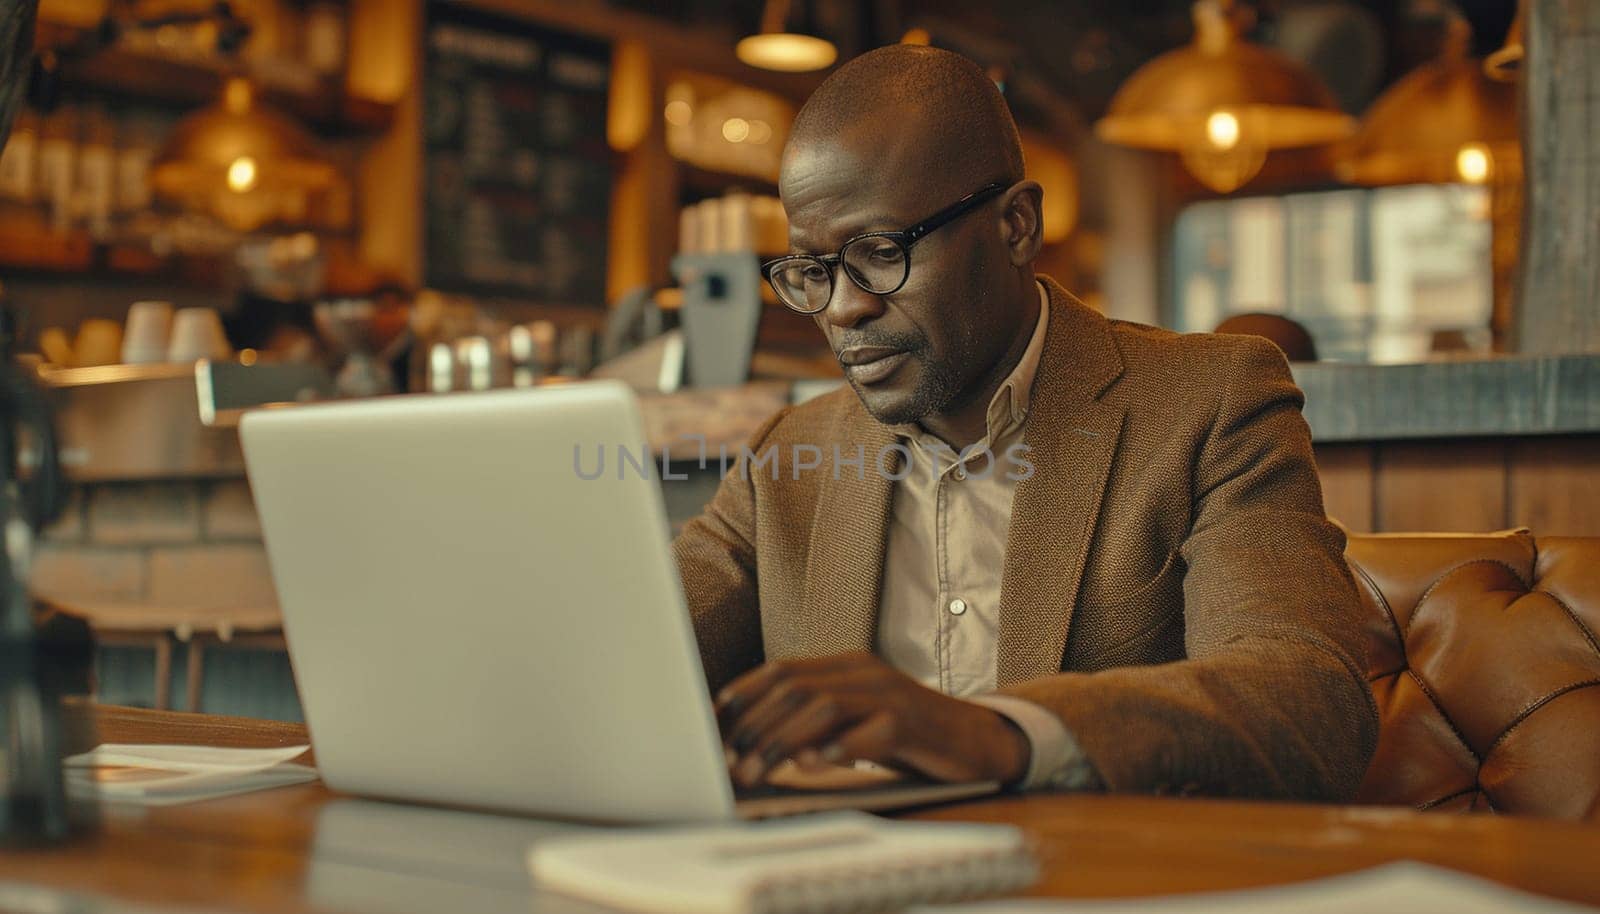 A man works for laptops in a cafe. Business environment by NeuroSky